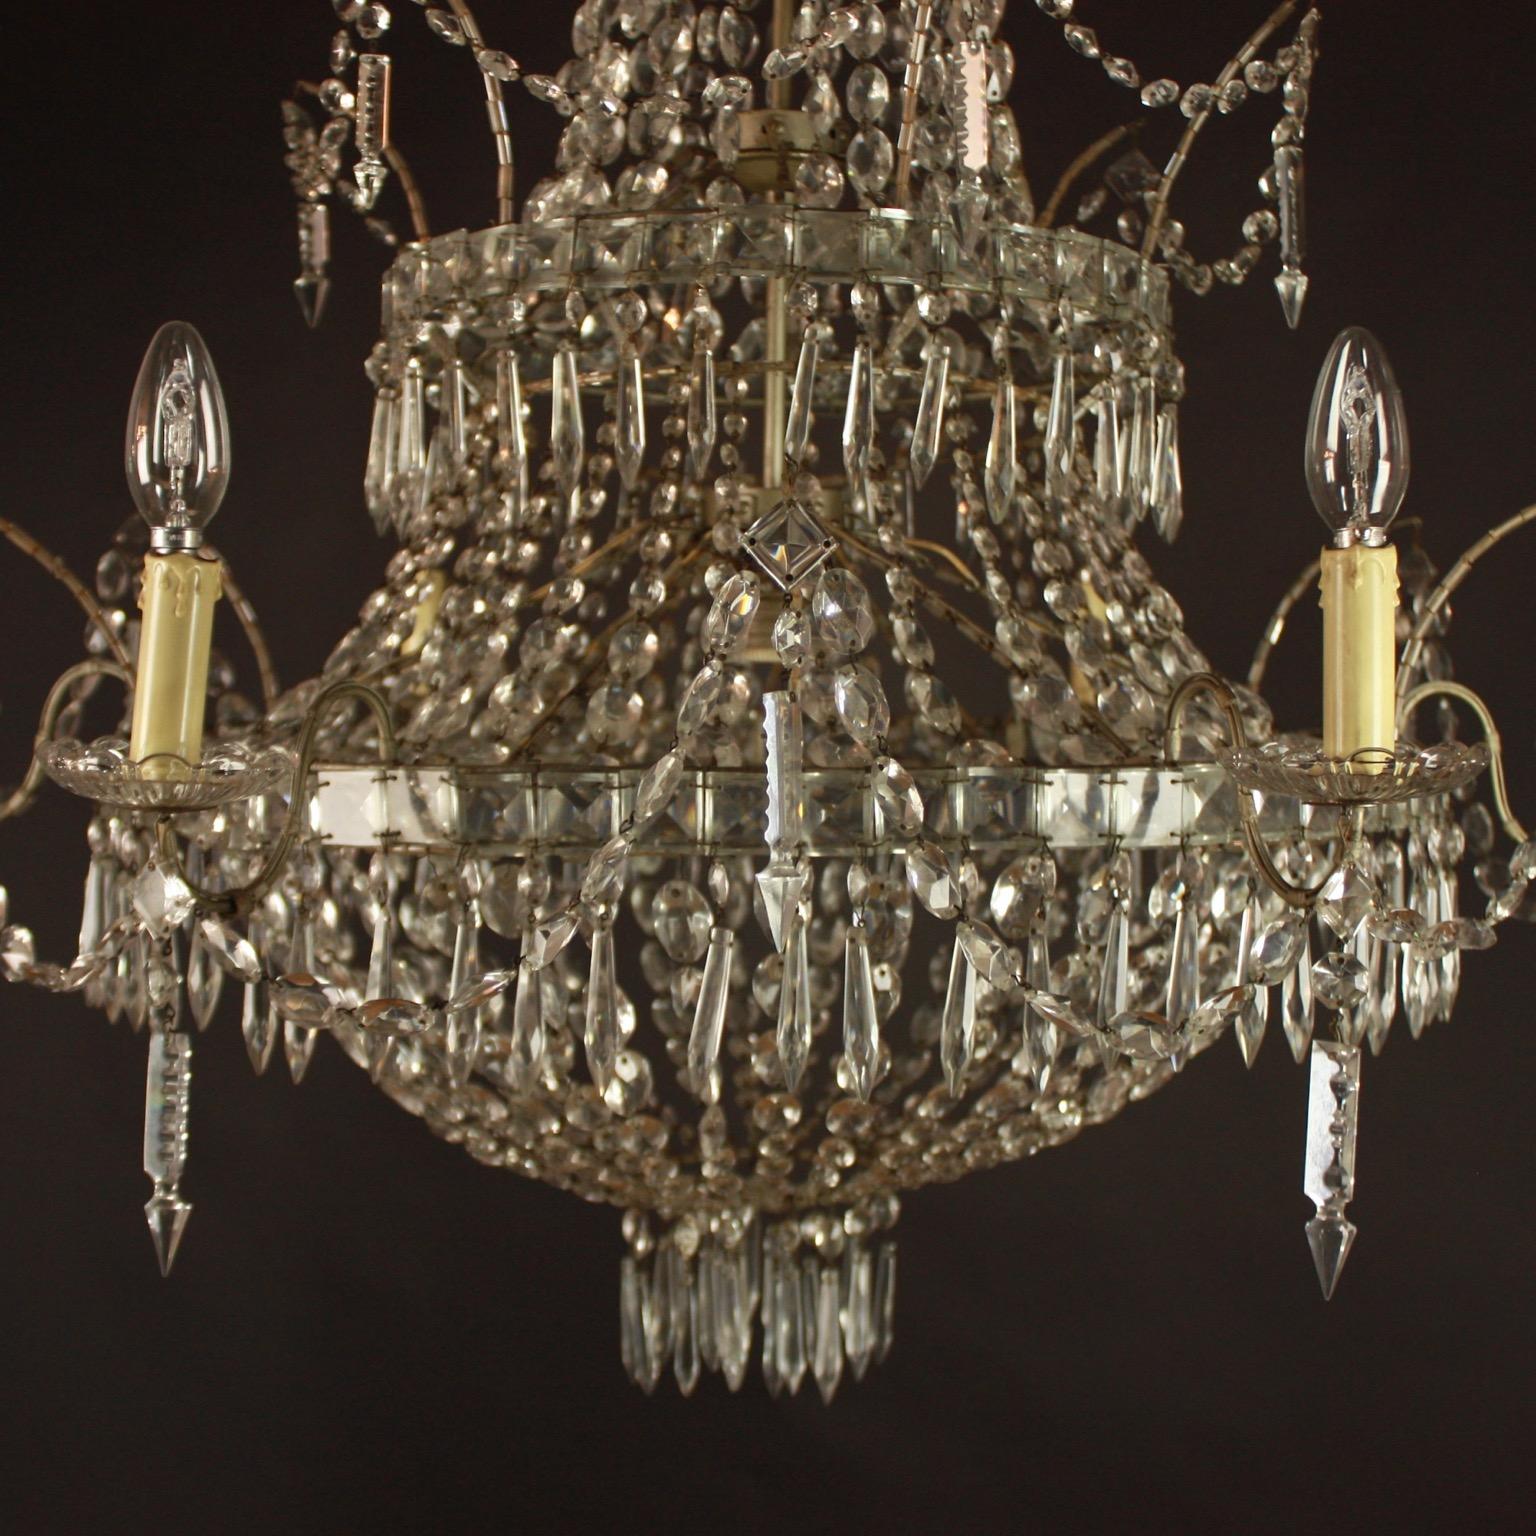 Large Pair of Spanish Empire Style 7-Light Crystal-Cut Chandeliers In Good Condition For Sale In Berlin, DE